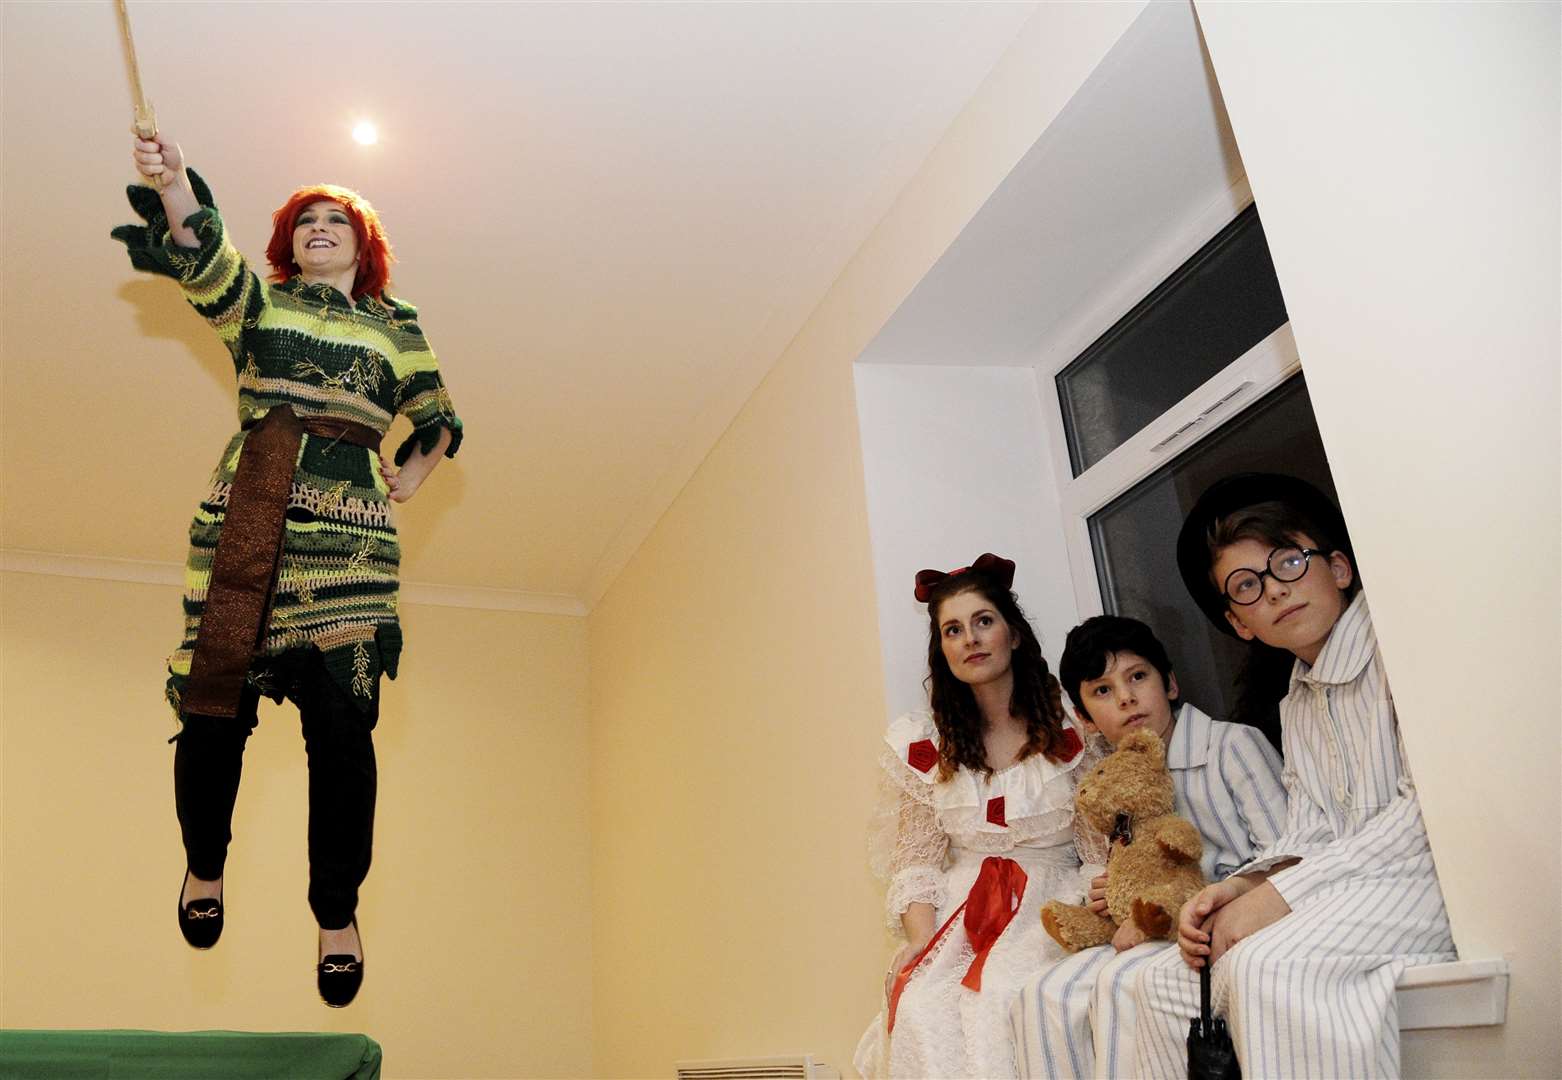 It's up, up and away for Peter Pan (Vickie Slater) as (seated from left) Wendy (Holly Allerdyce), Michael (Zander Mitchell) and John (Jaye Farley) look on. Picture: Eric Cormack